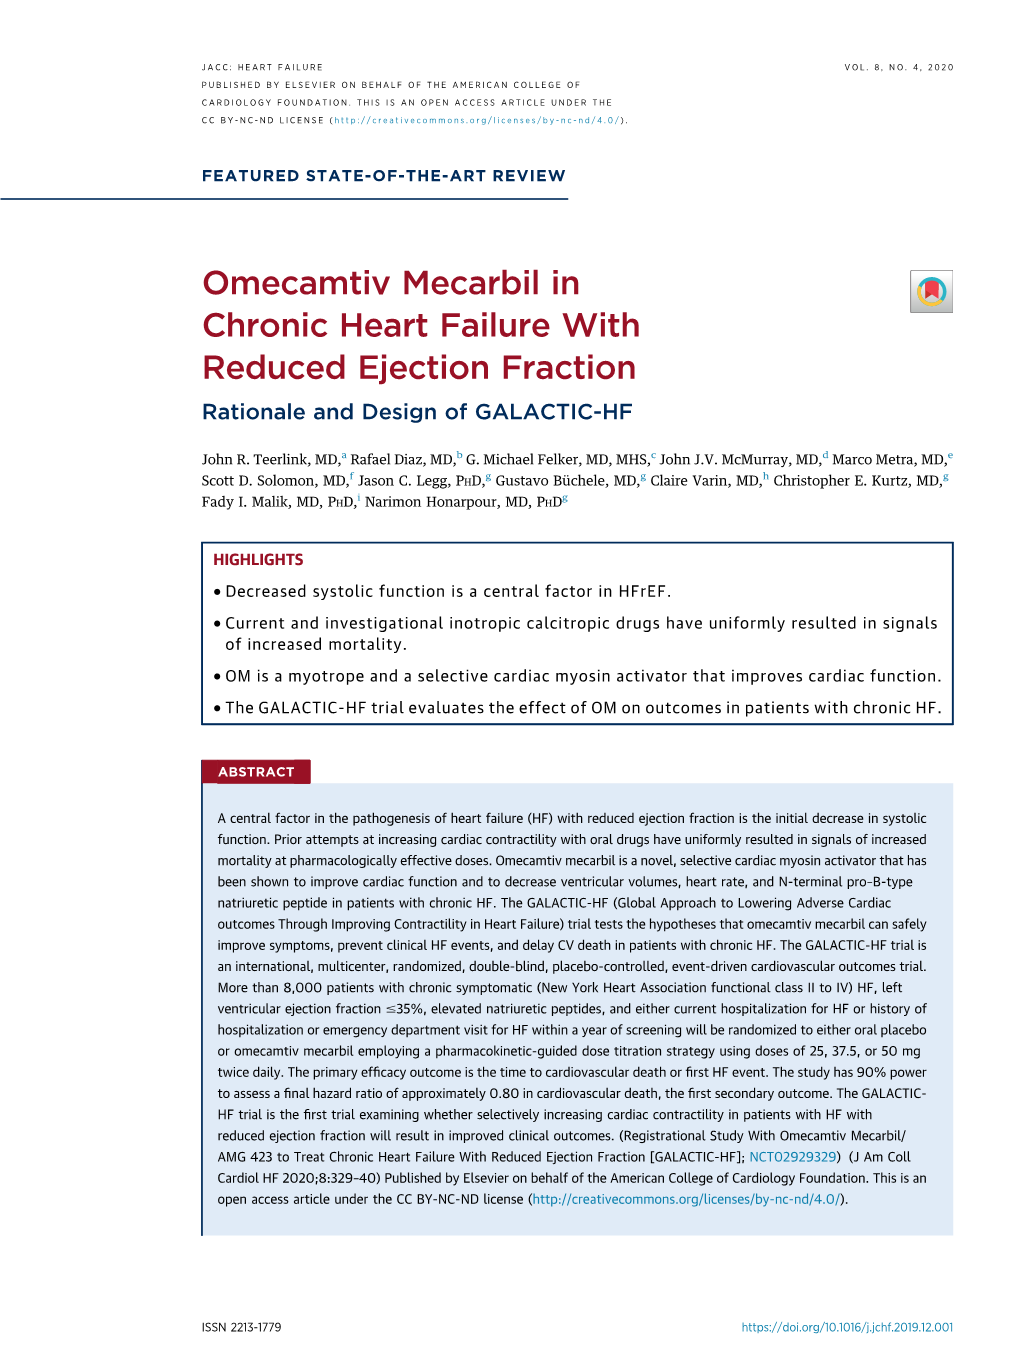 Omecamtiv Mecarbil in Chronic Heart€Failure with Reduced Ejection Fraction